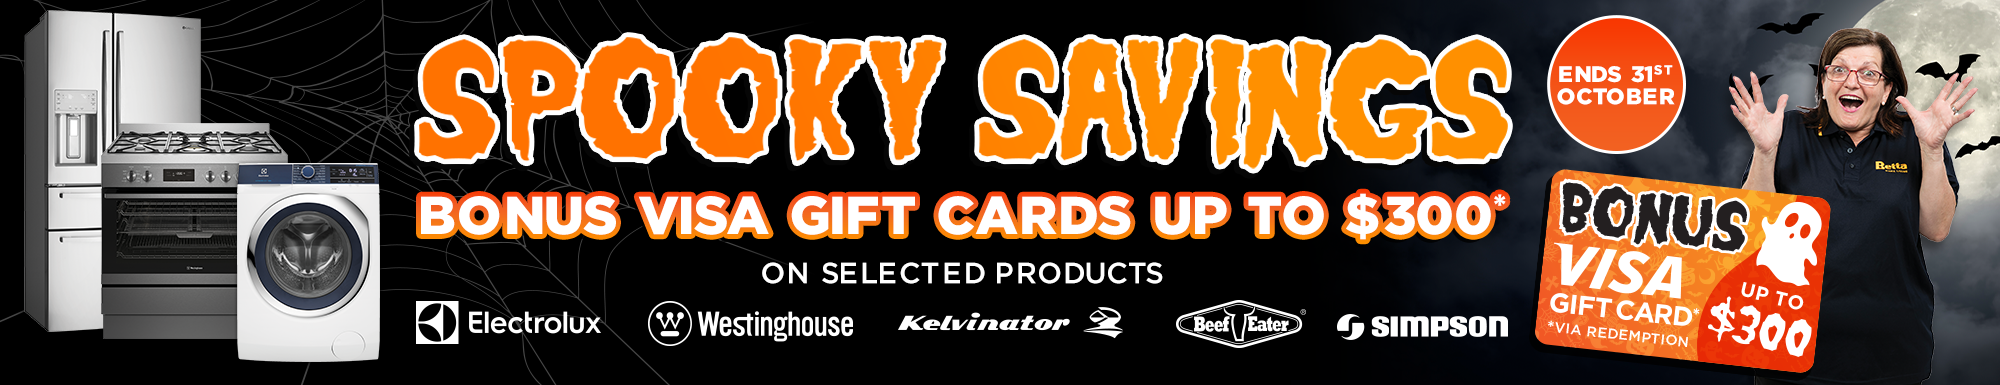 Get onus Visa gift cards up to $300 on selected products